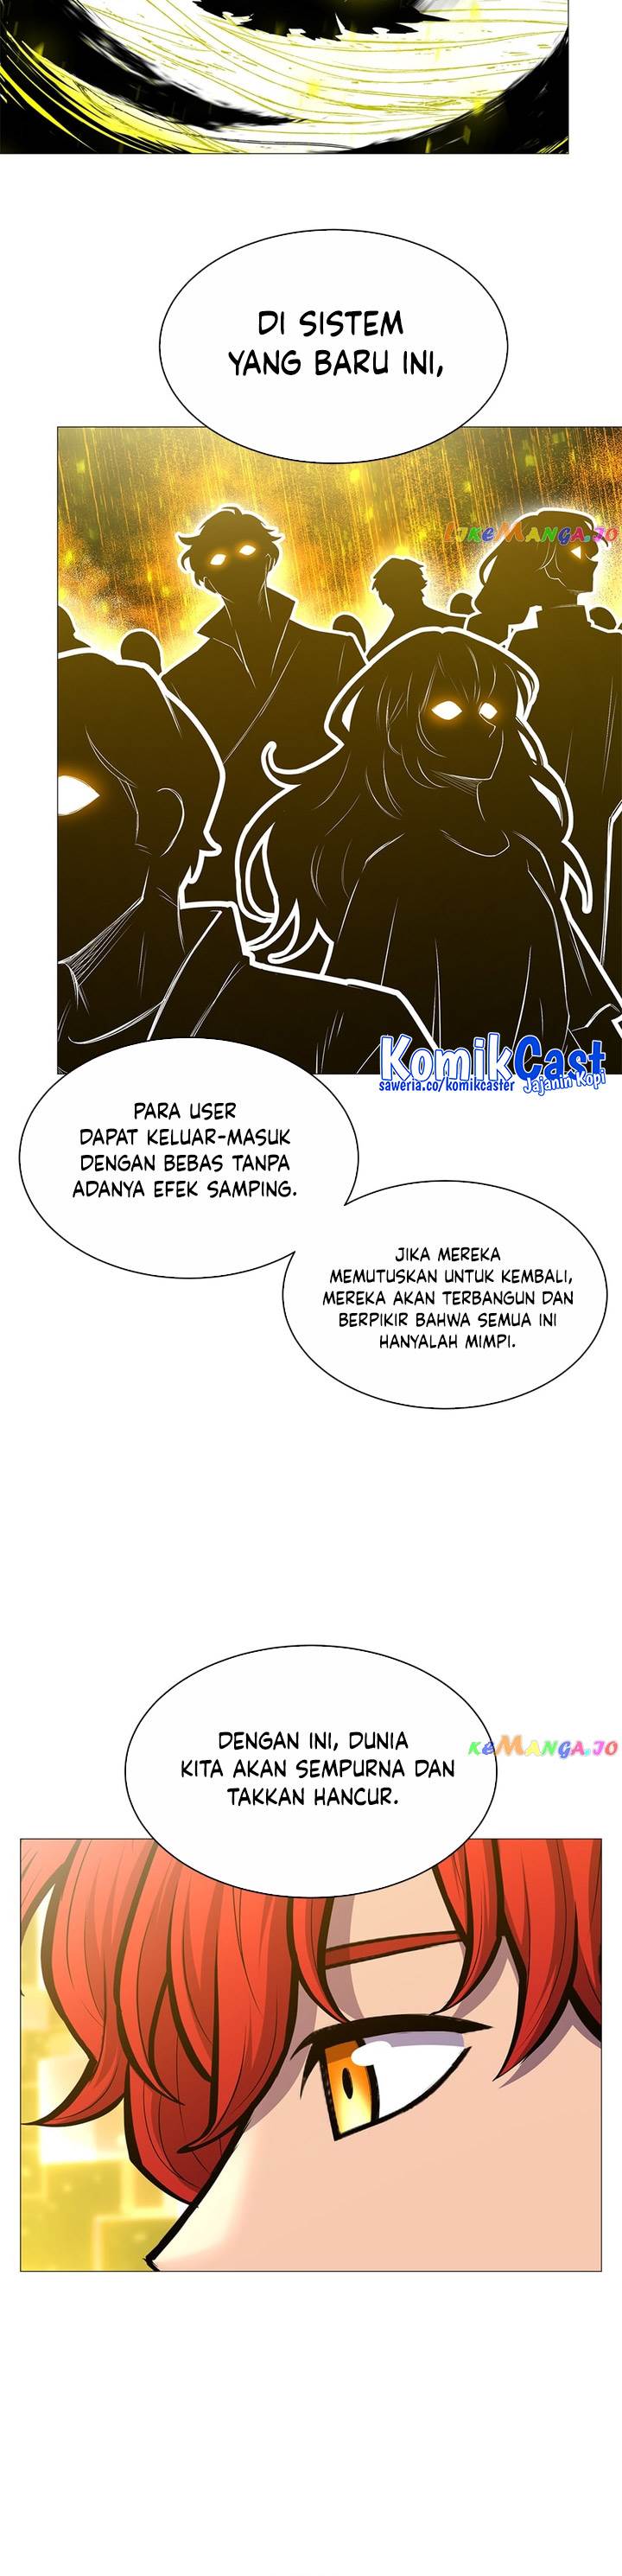 Updater Chapter 136 End